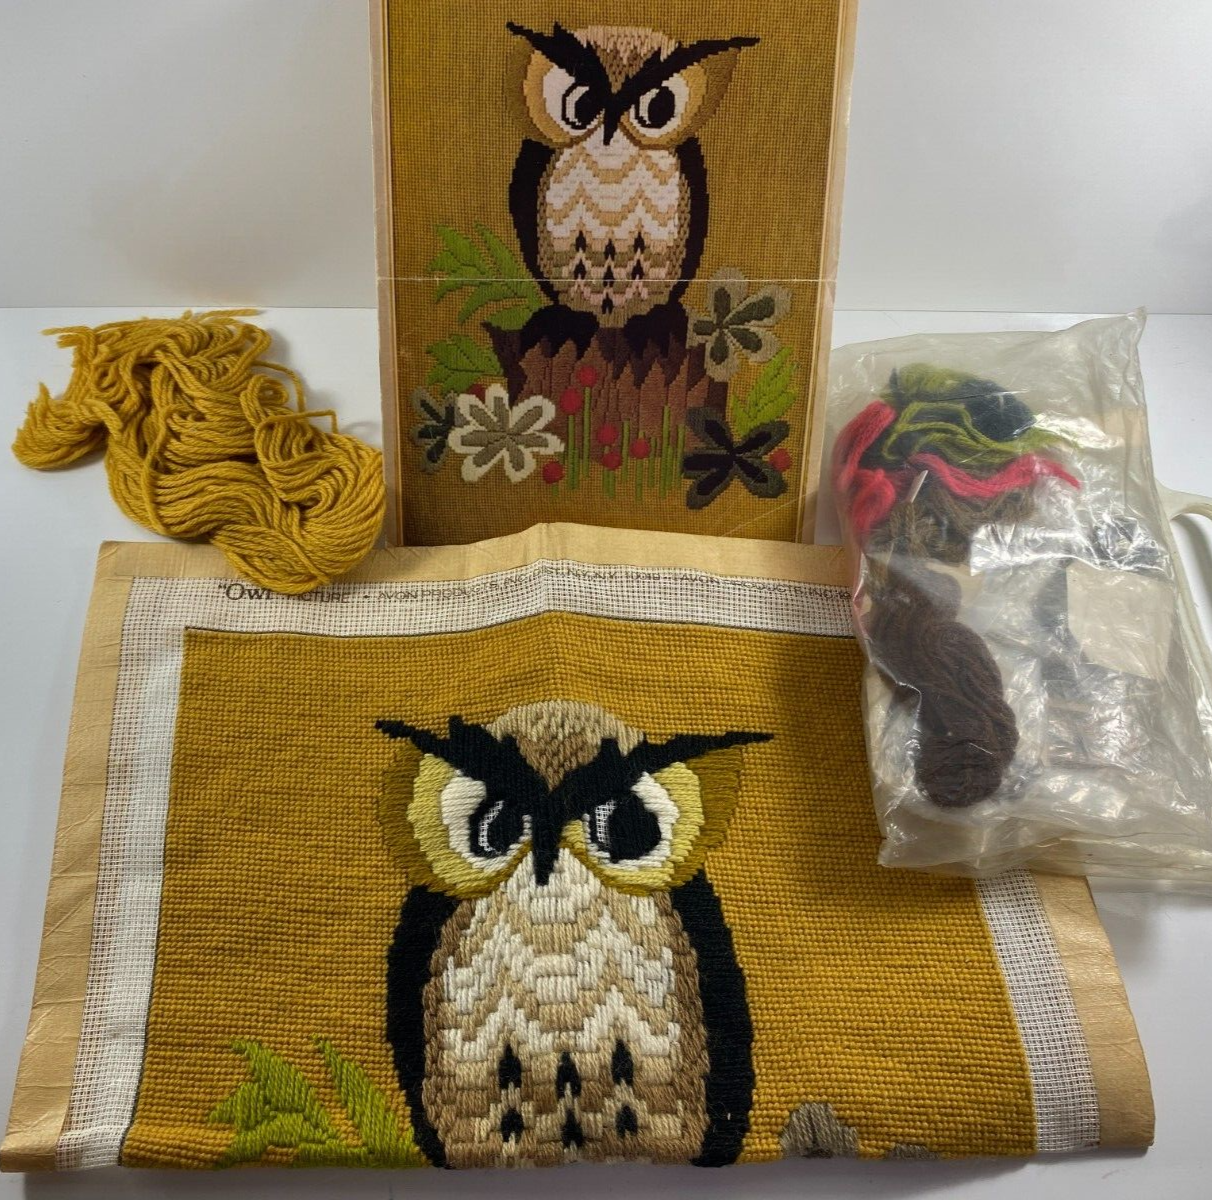 Vintage Partially Done Avon Long Stitch Crewel Needlepoint Owl Kit 14 x 18 in - $29.69